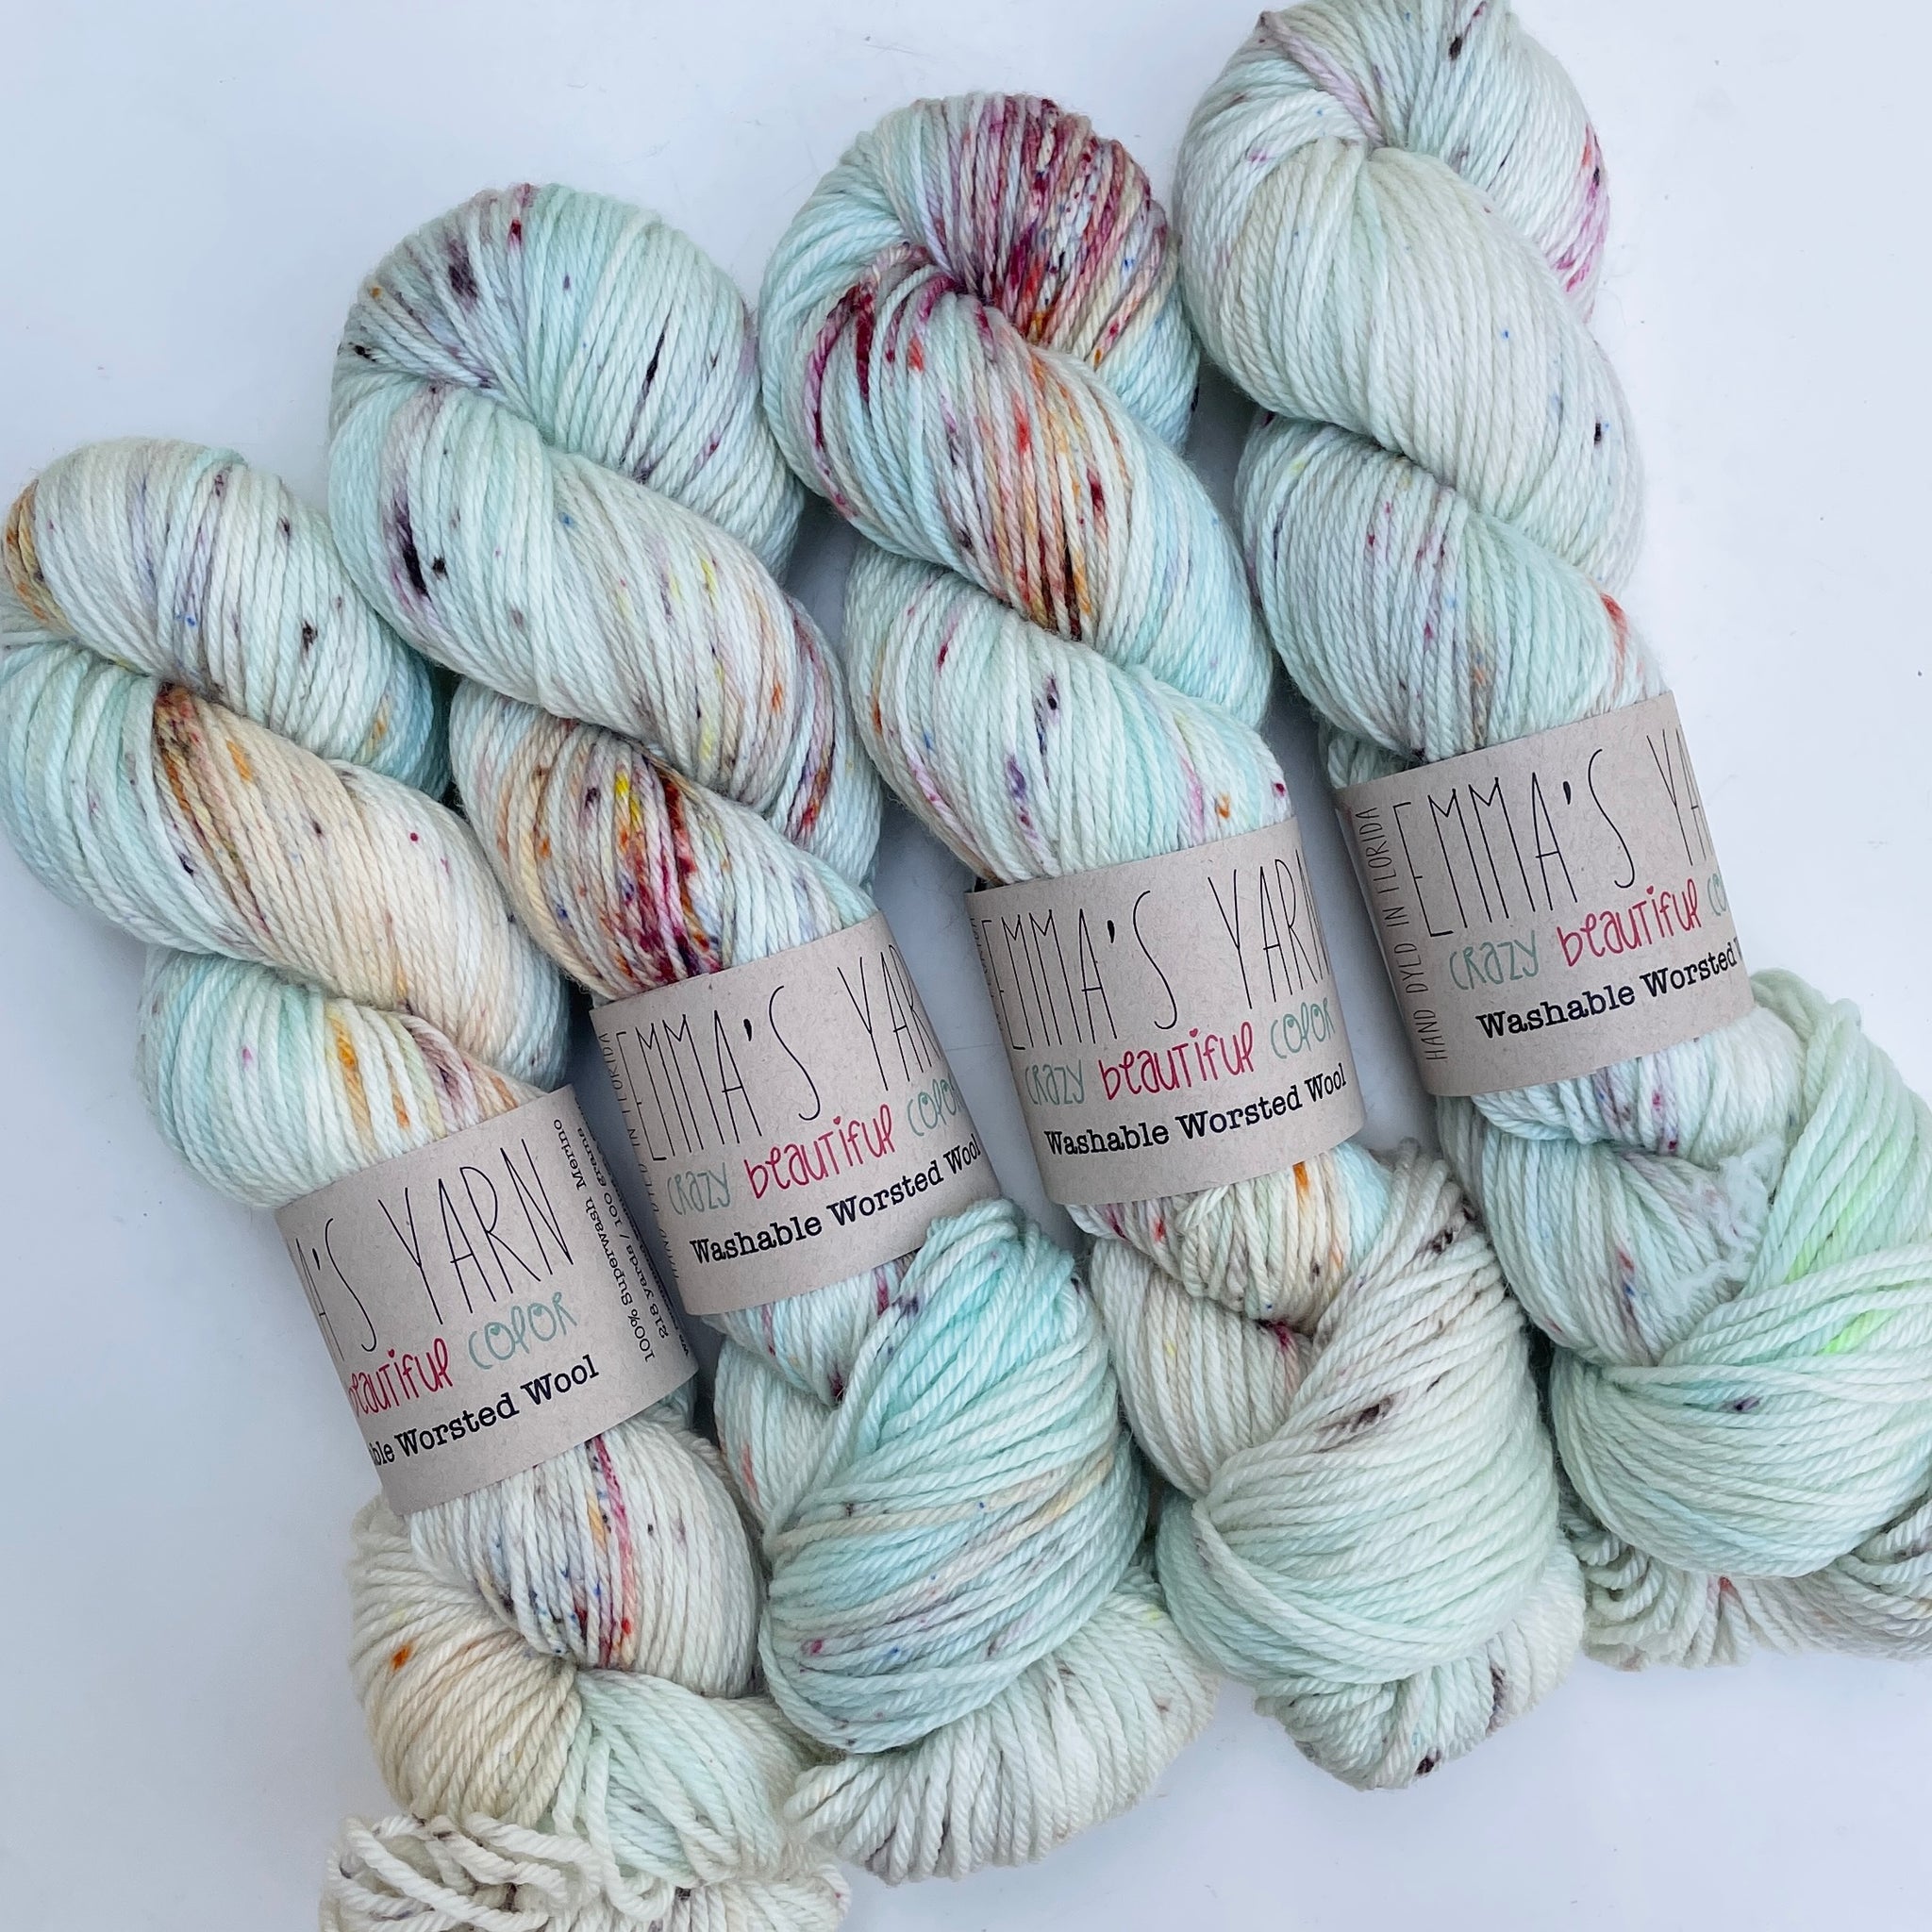 Bare Necessities - Washable Worsted Wool (6)